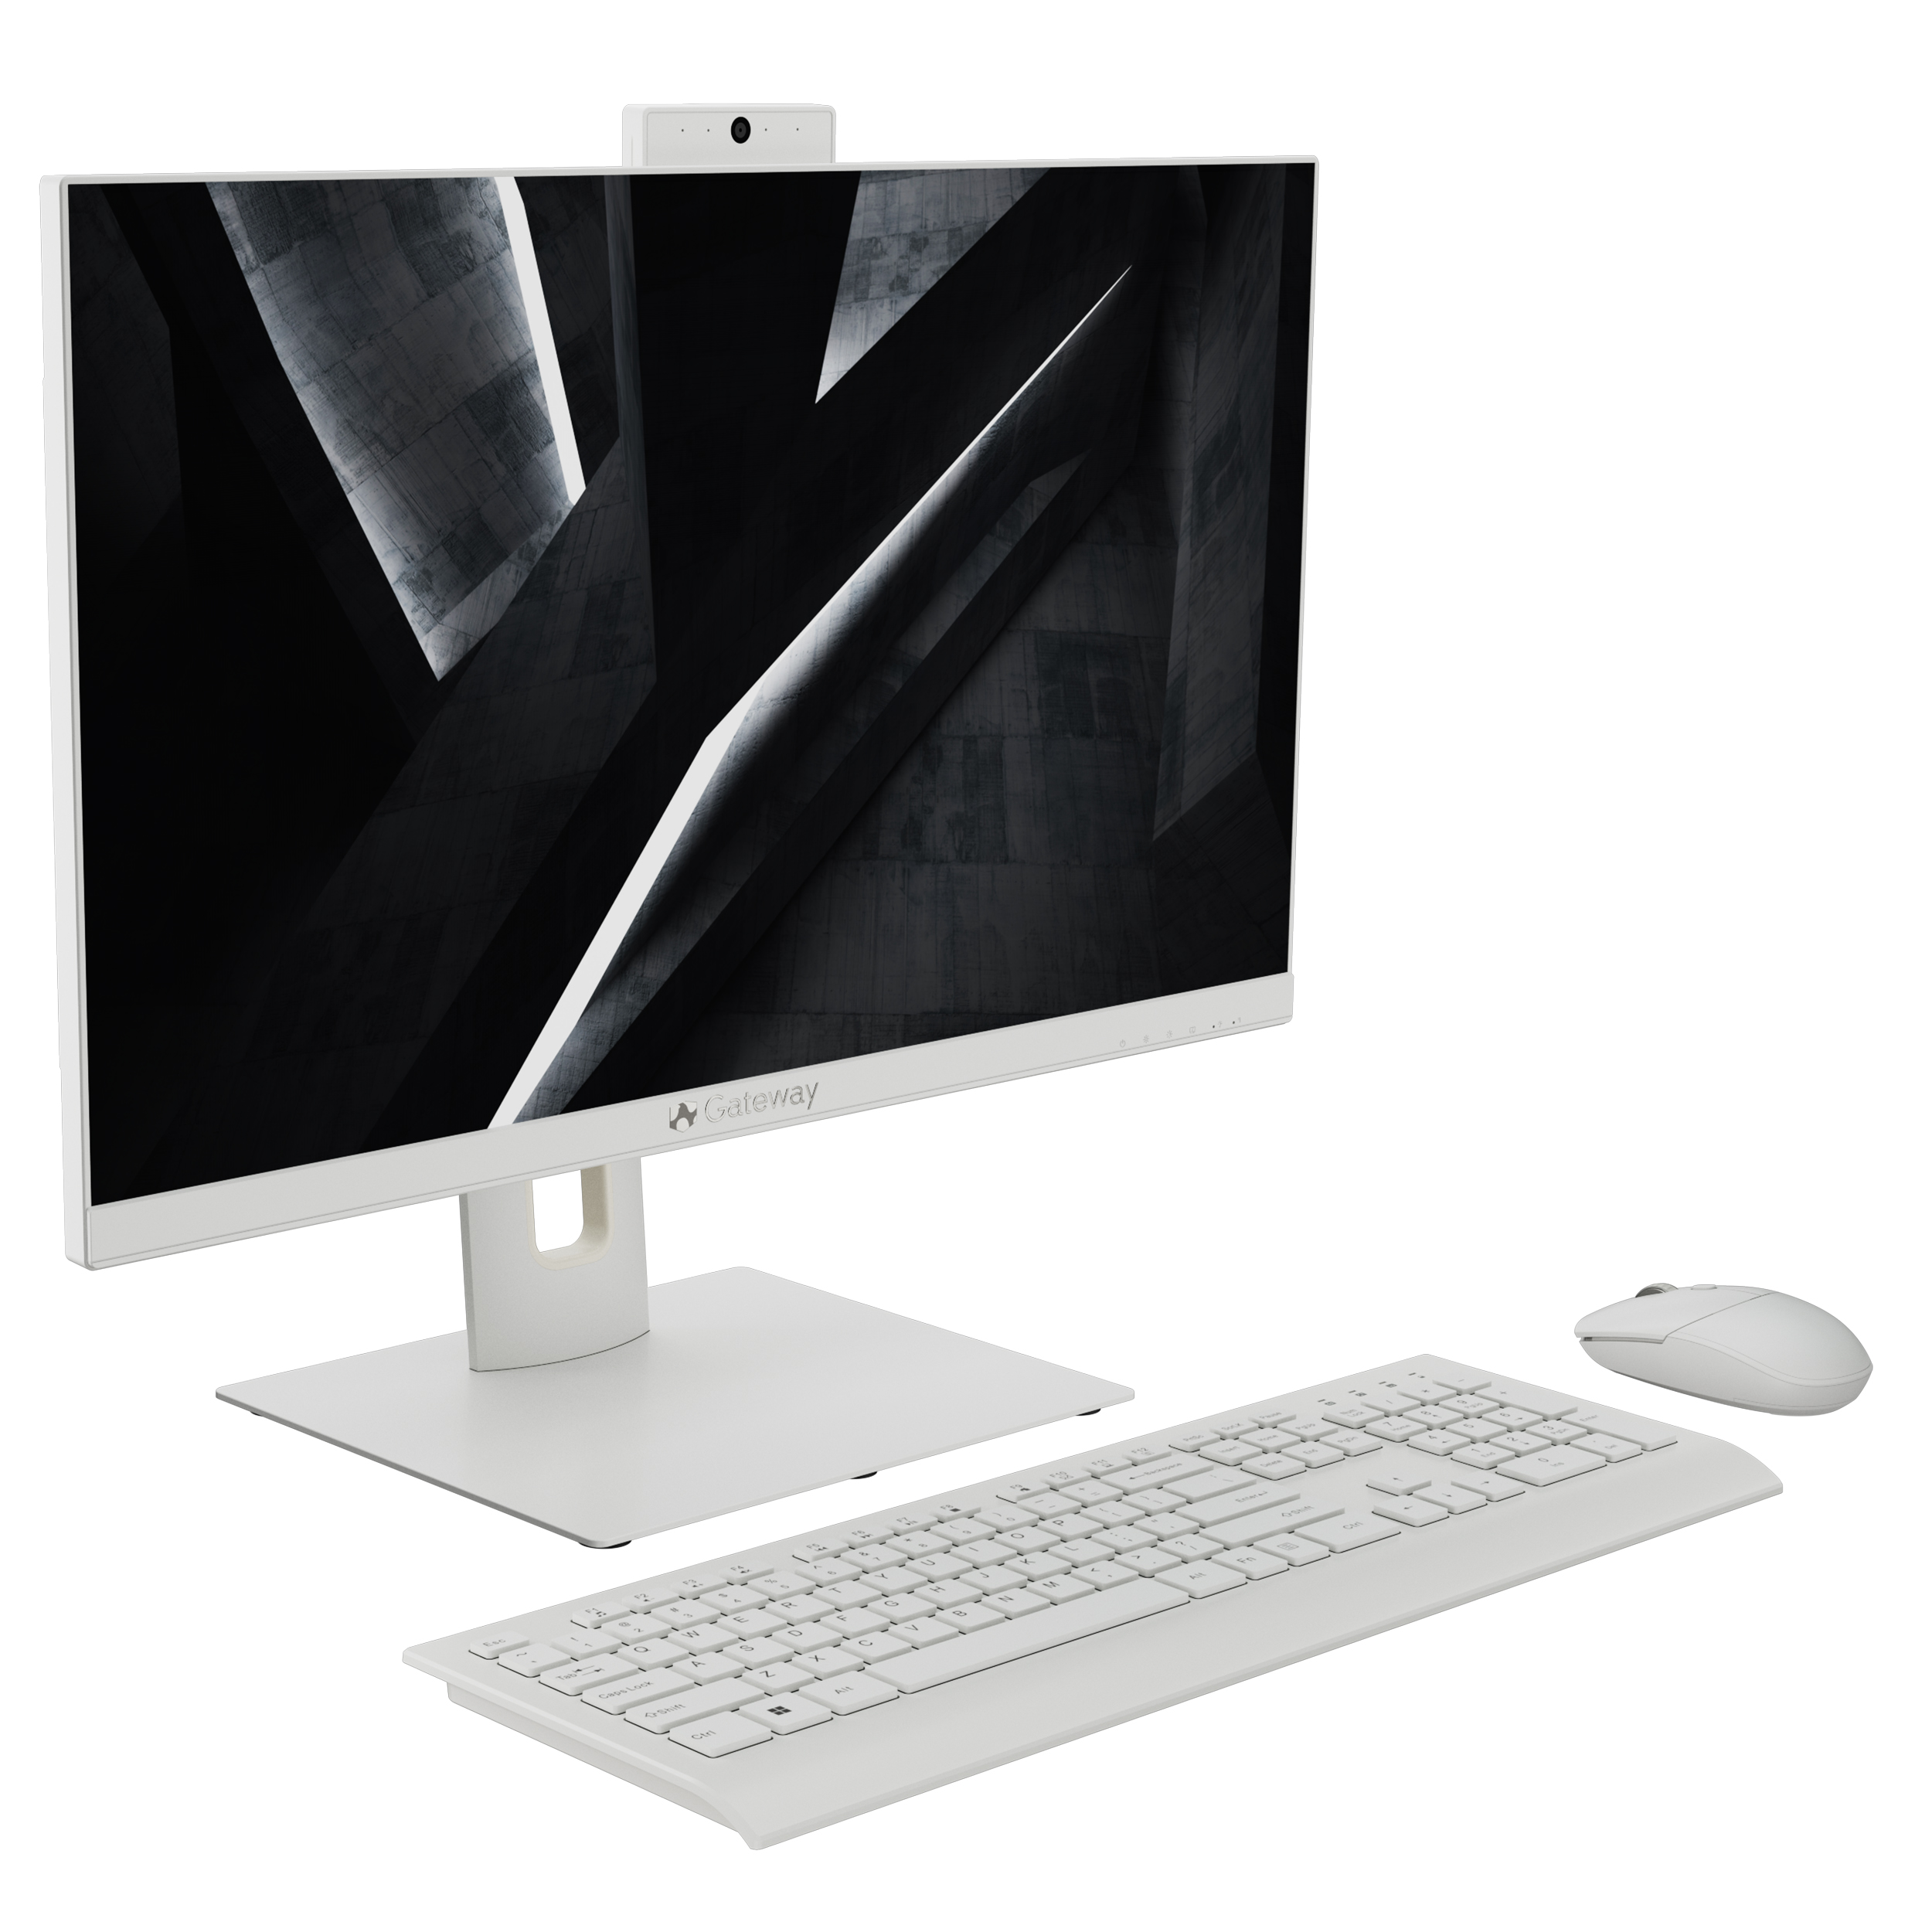 Gateway 23.8" All-in-one Desktop, Fully Adjustable Stand, FHD, Intel Pentium J5040, 4GB RAM, 128GB SSD, 2MP Camera, Windows 11, Microsoft 365 Personal 1-Year Included, Mouse & Keyboard Included, White - image 2 of 11